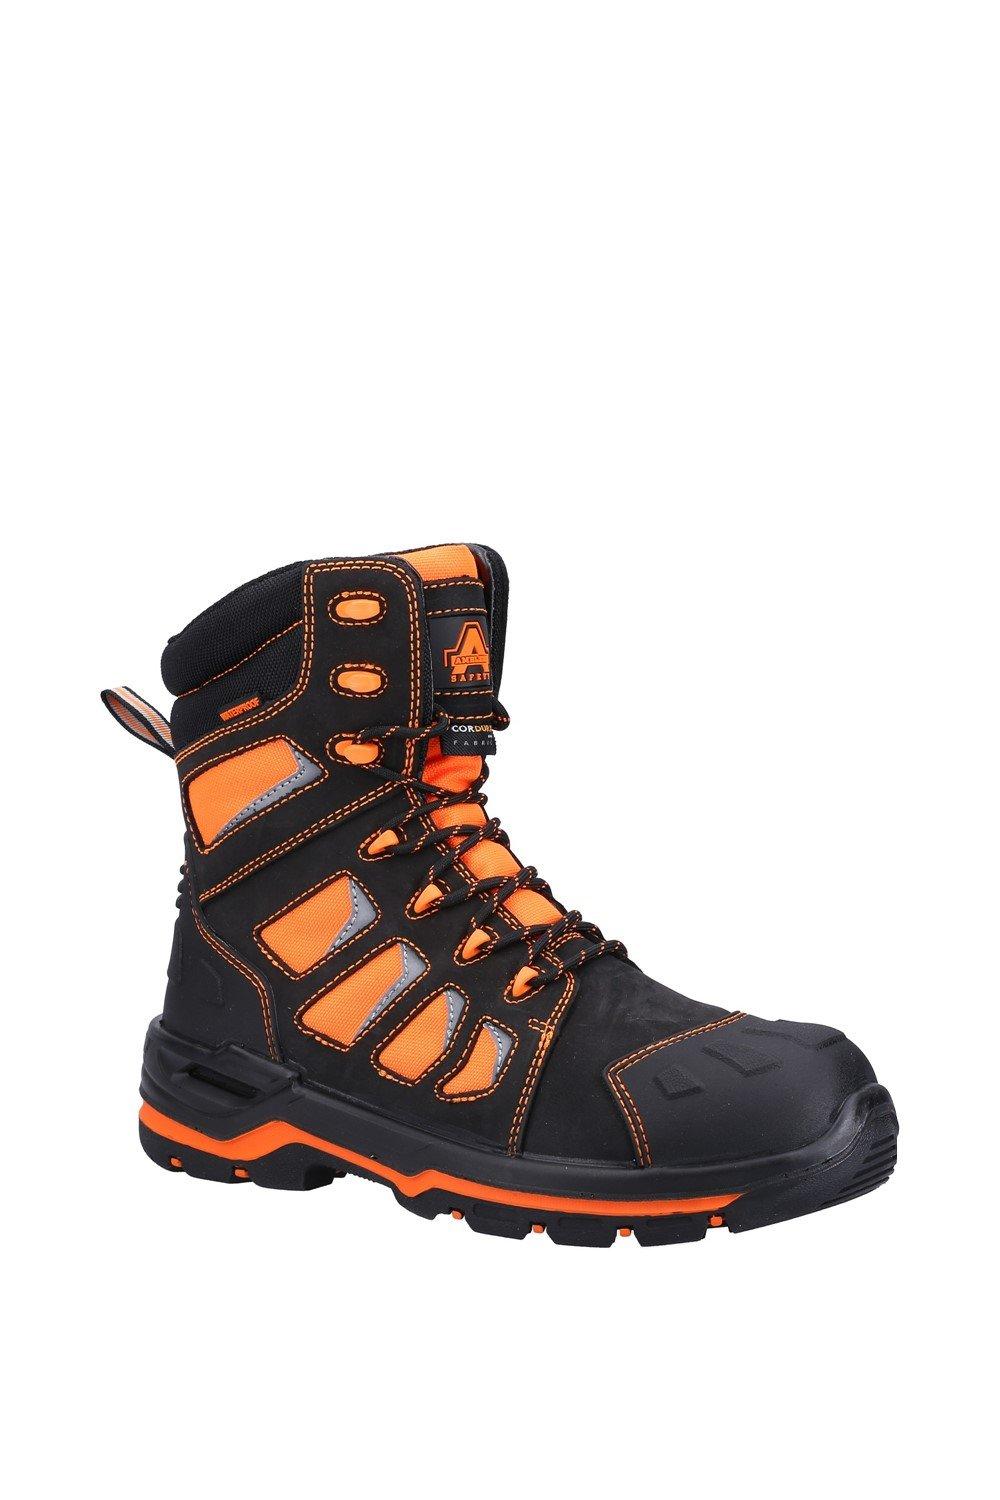 'Beacon' Safety Boots